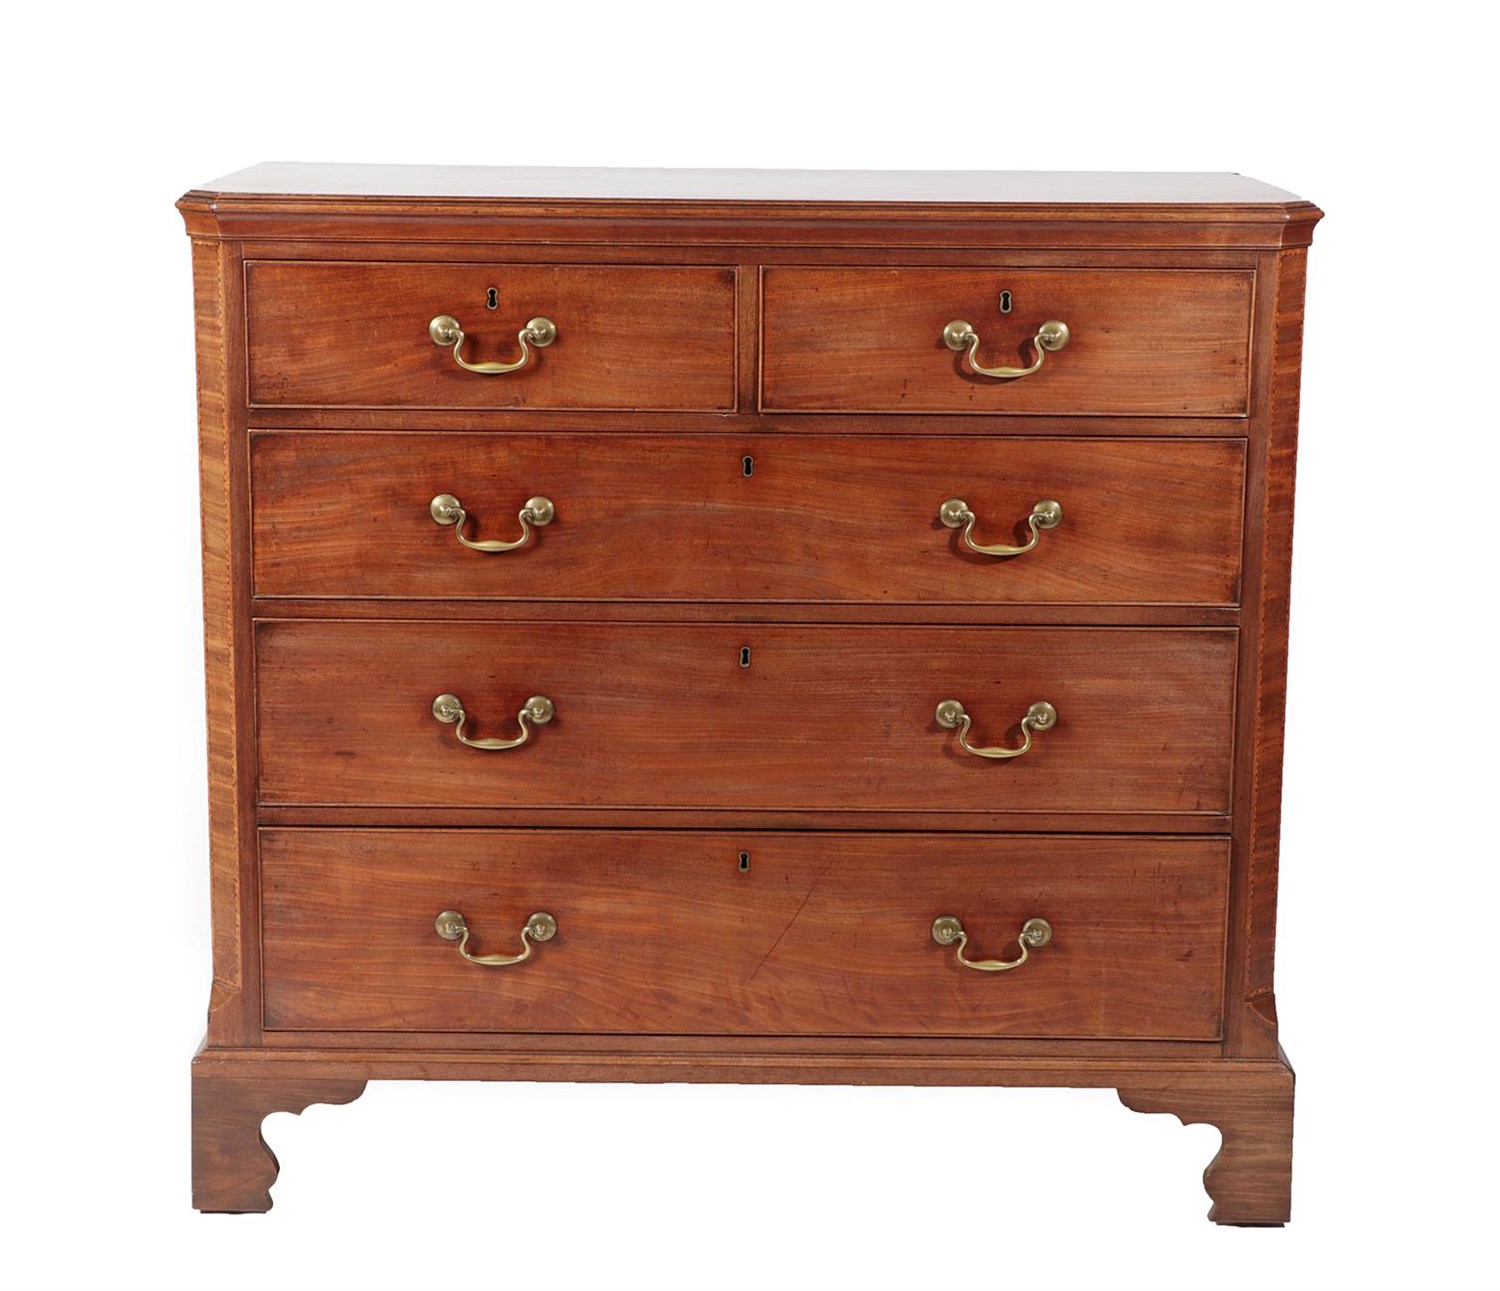 Lot 486 - <> A George III Mahogany Straight Front Chest of Drawers, early 19th century, the moulded top above